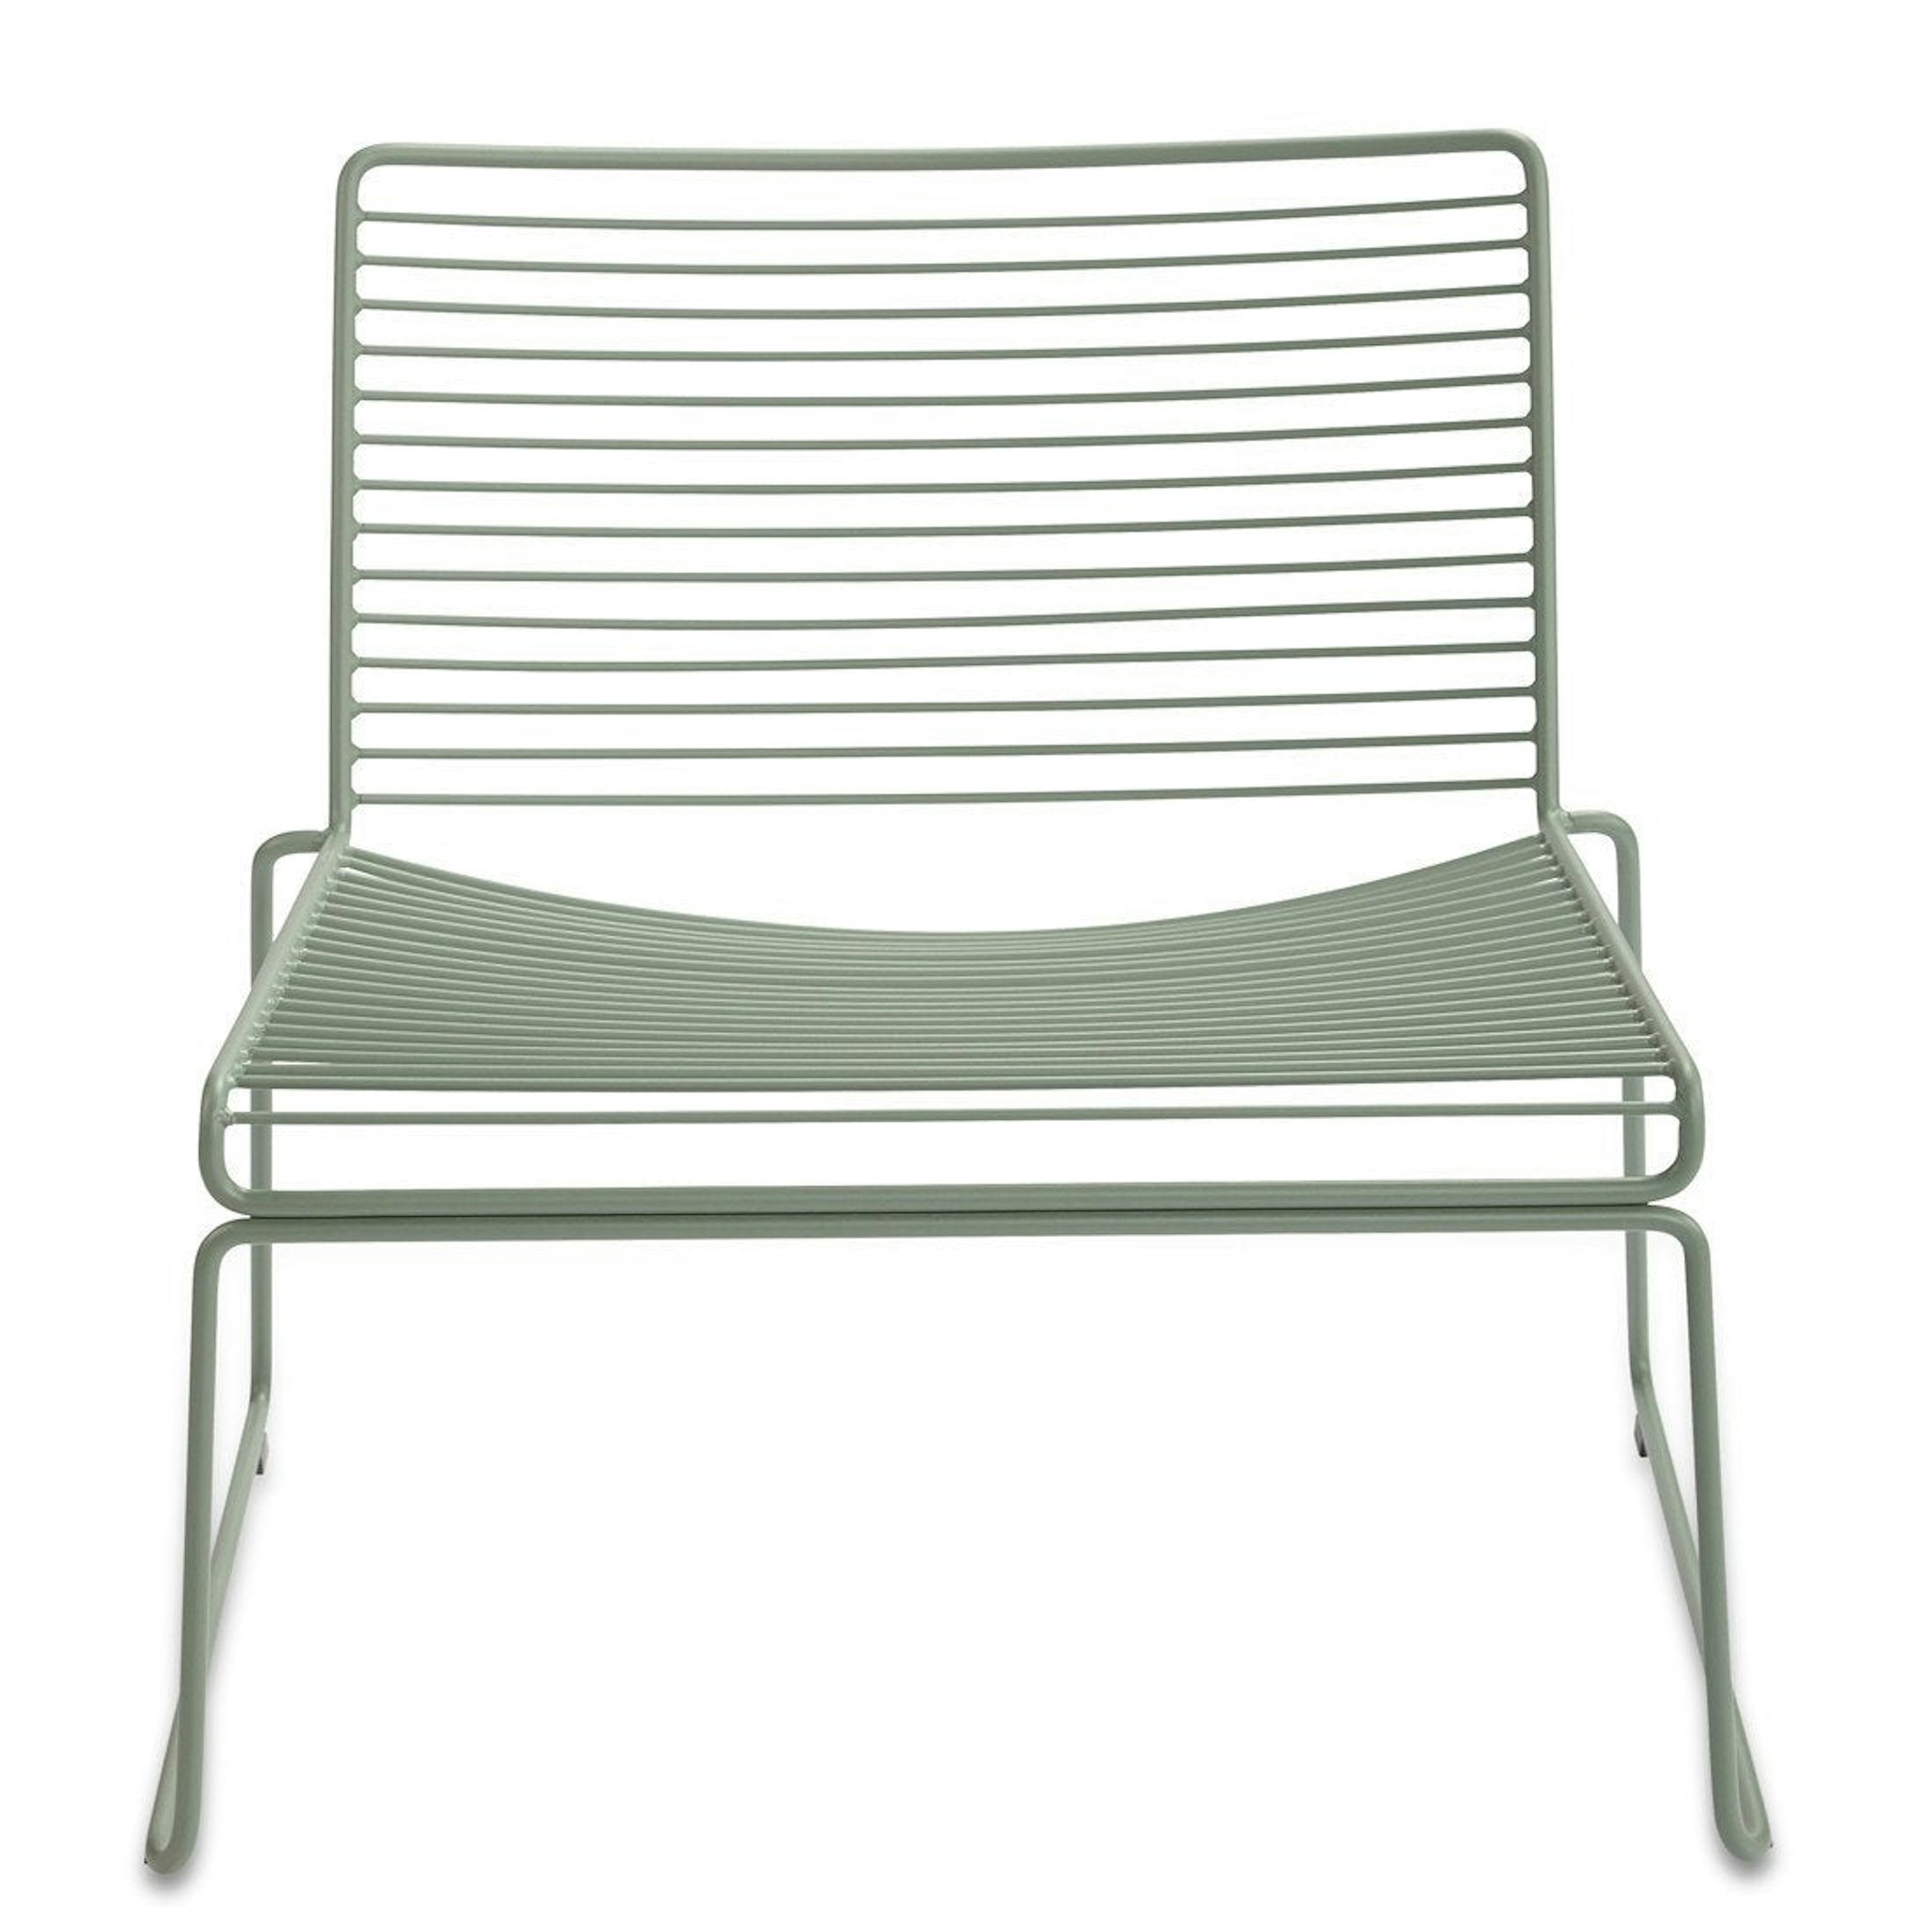 Hee Lounge Chair / fall green by Hay - Clearance